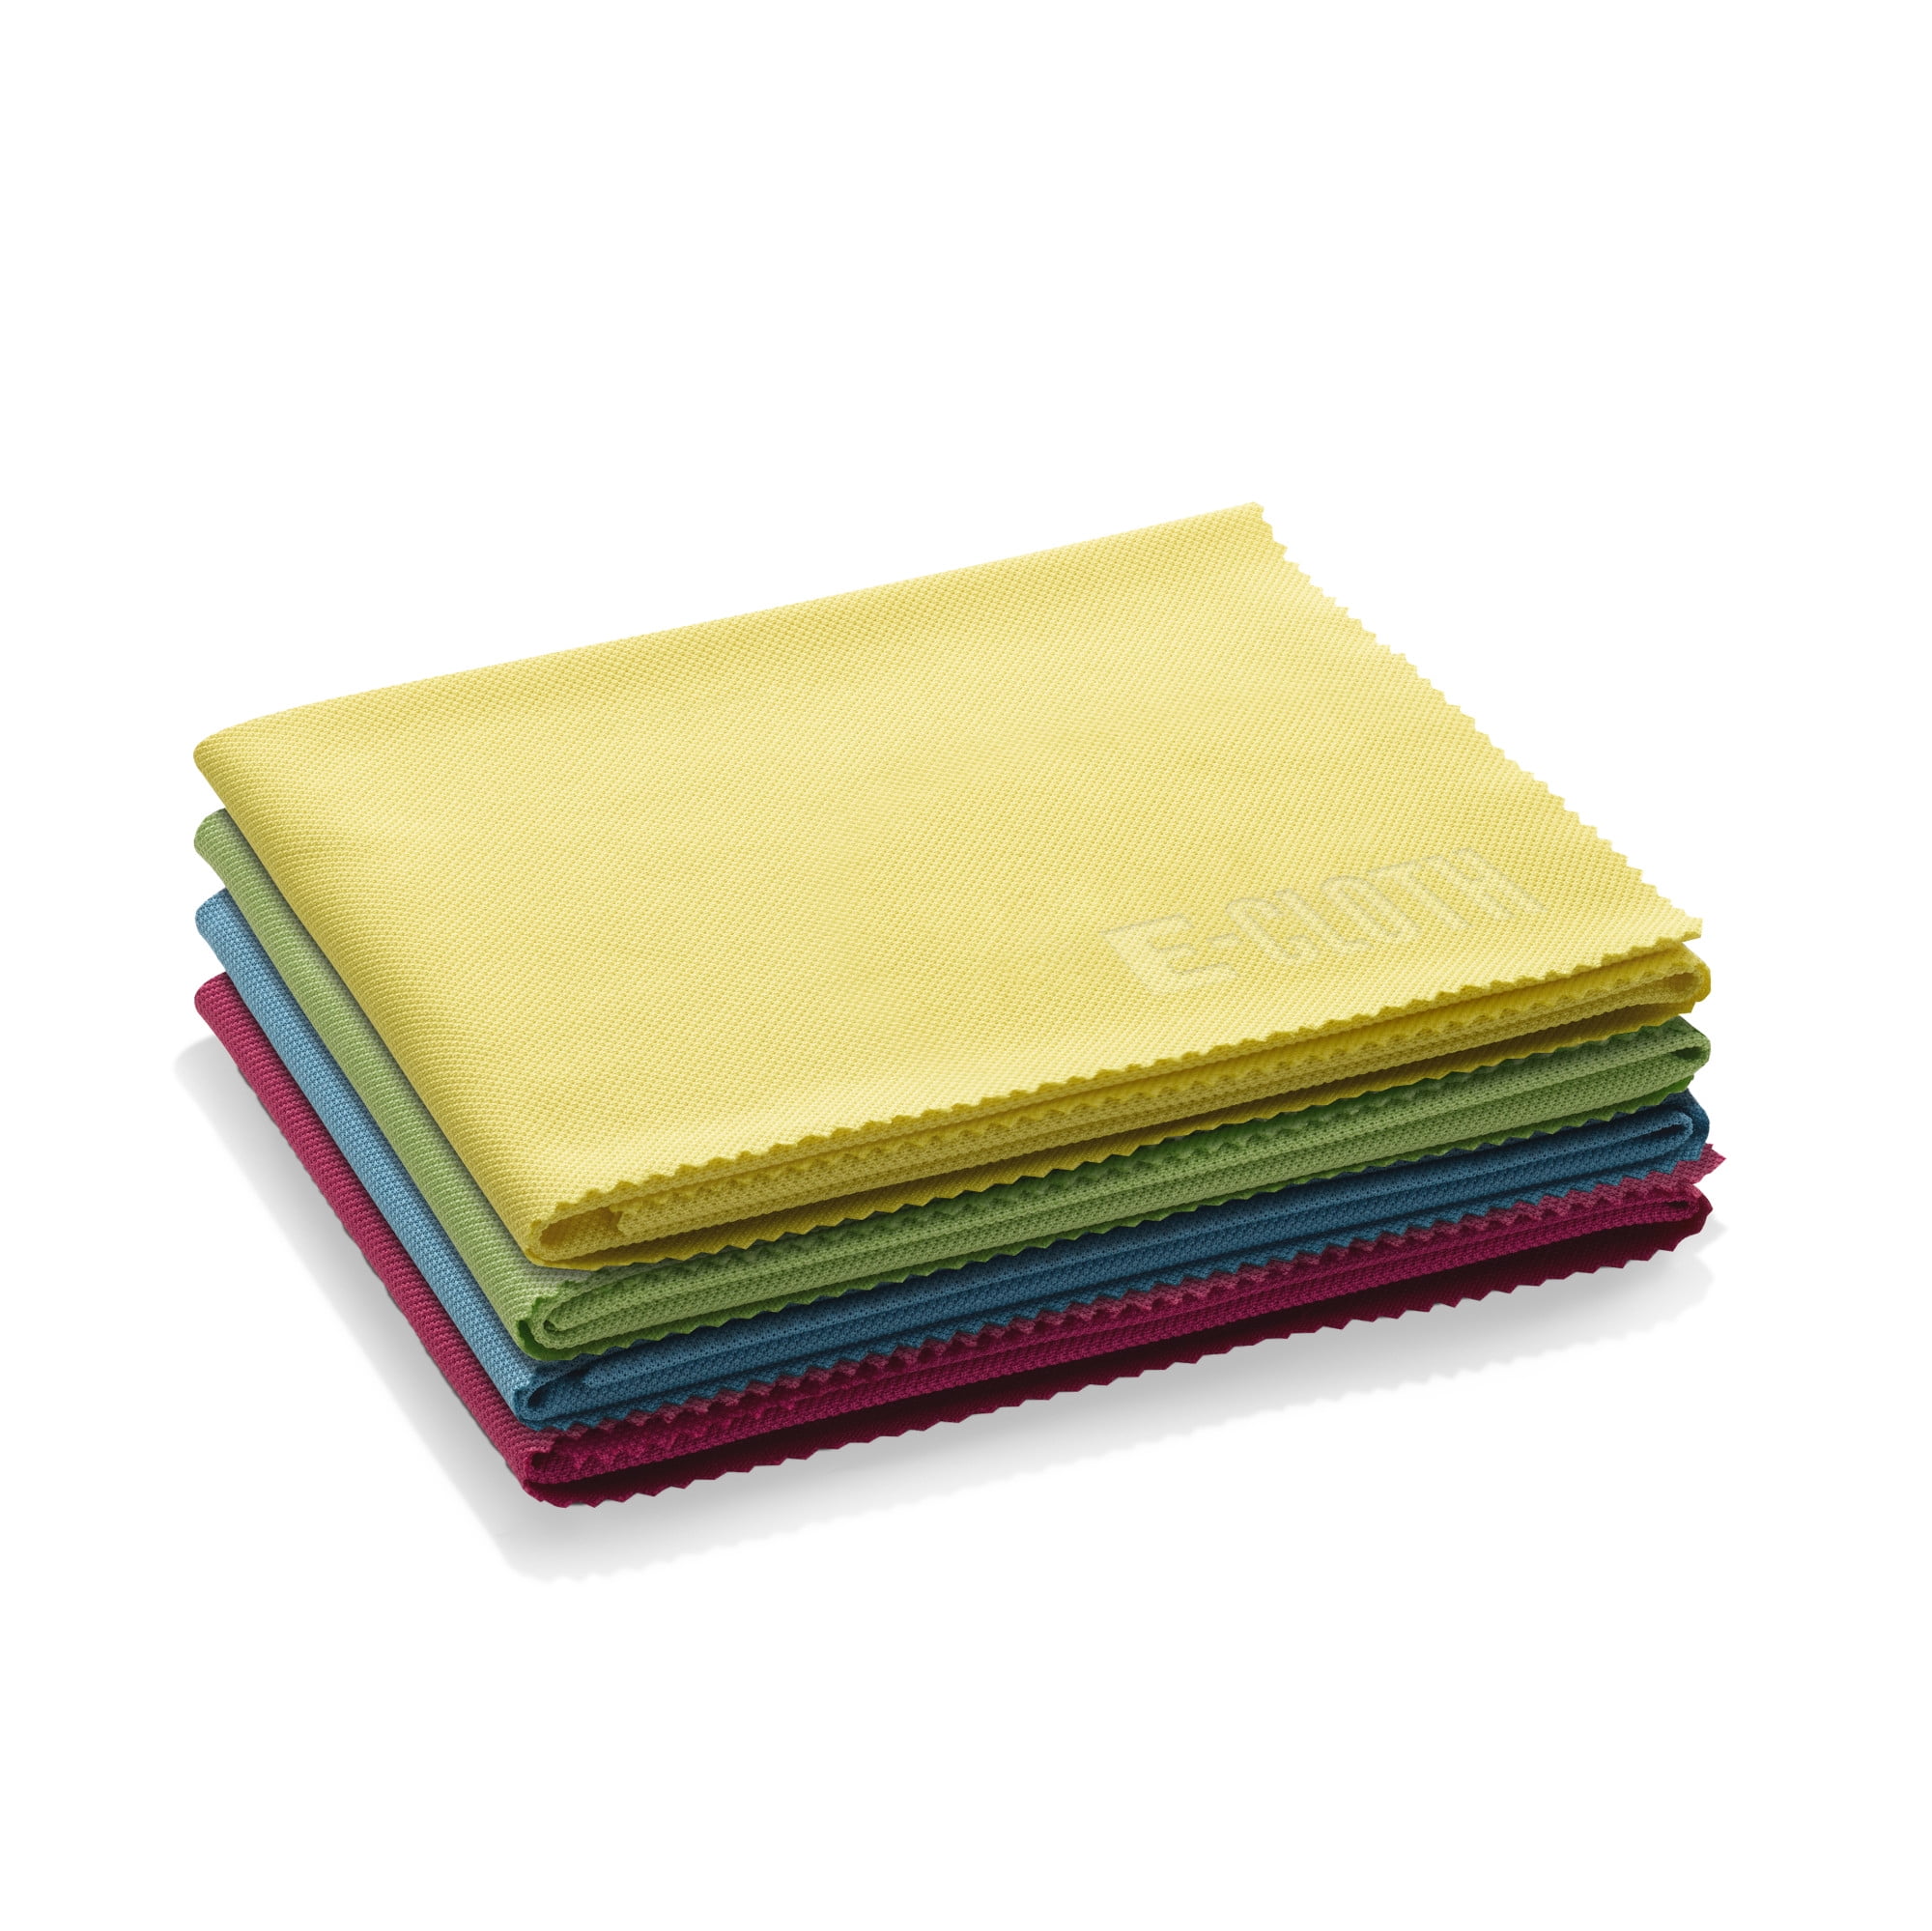 NEW E-Cloth Window Polyamide/Polyester Cleaning Cloth 4 pk 10615W 